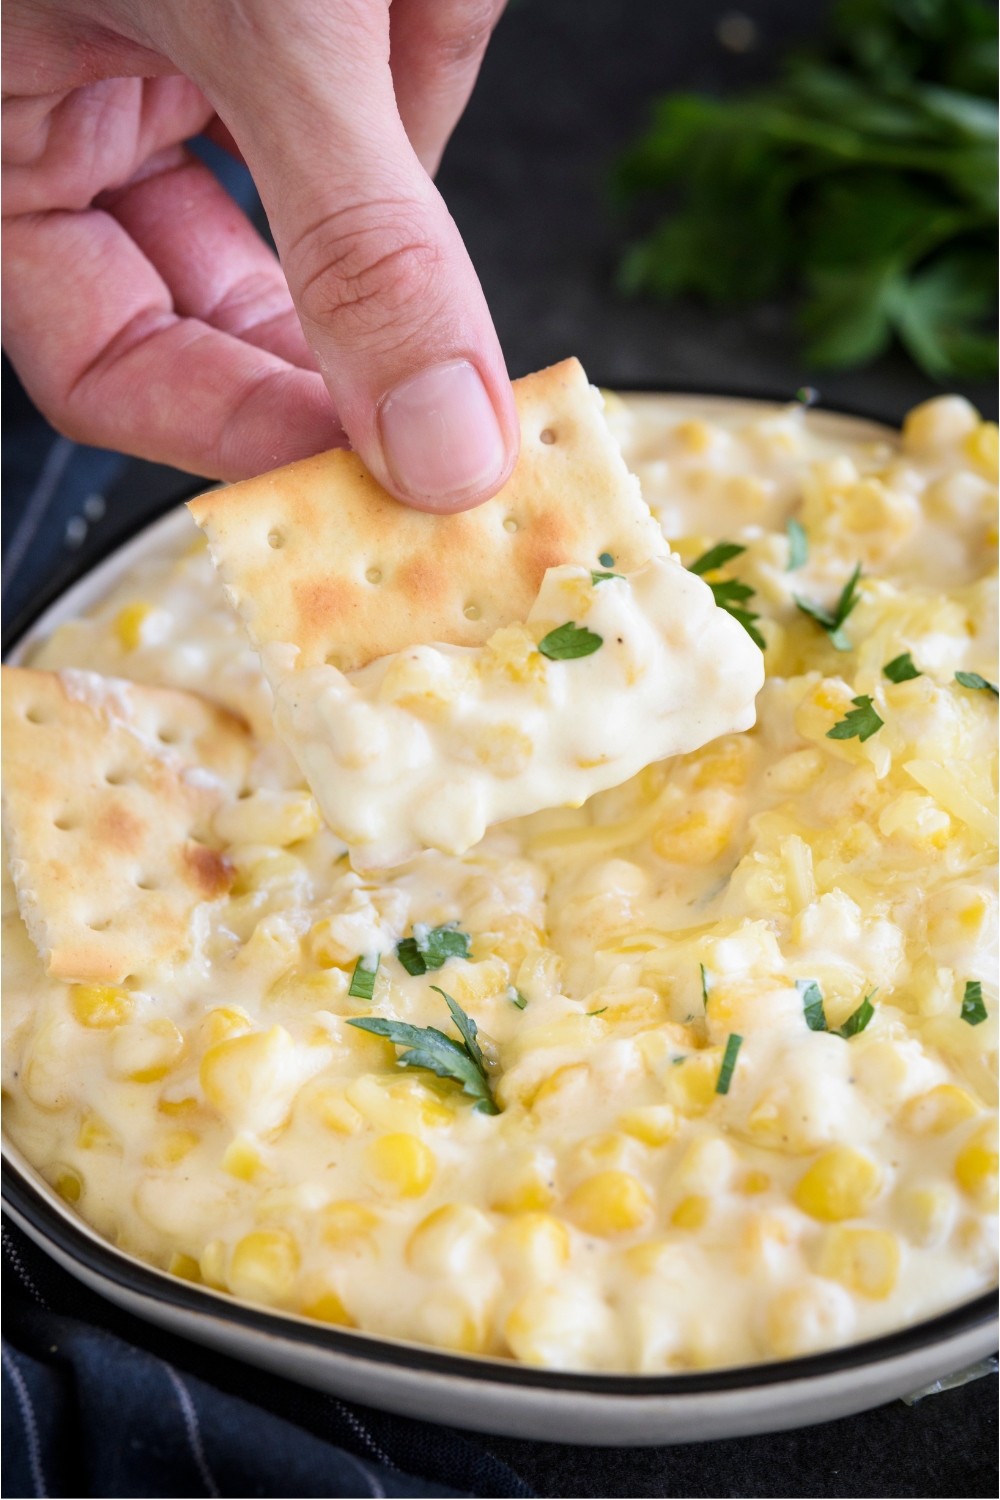 Close up of a cracker being dipped into a bowl of cream cheese corn garnished with parsley.